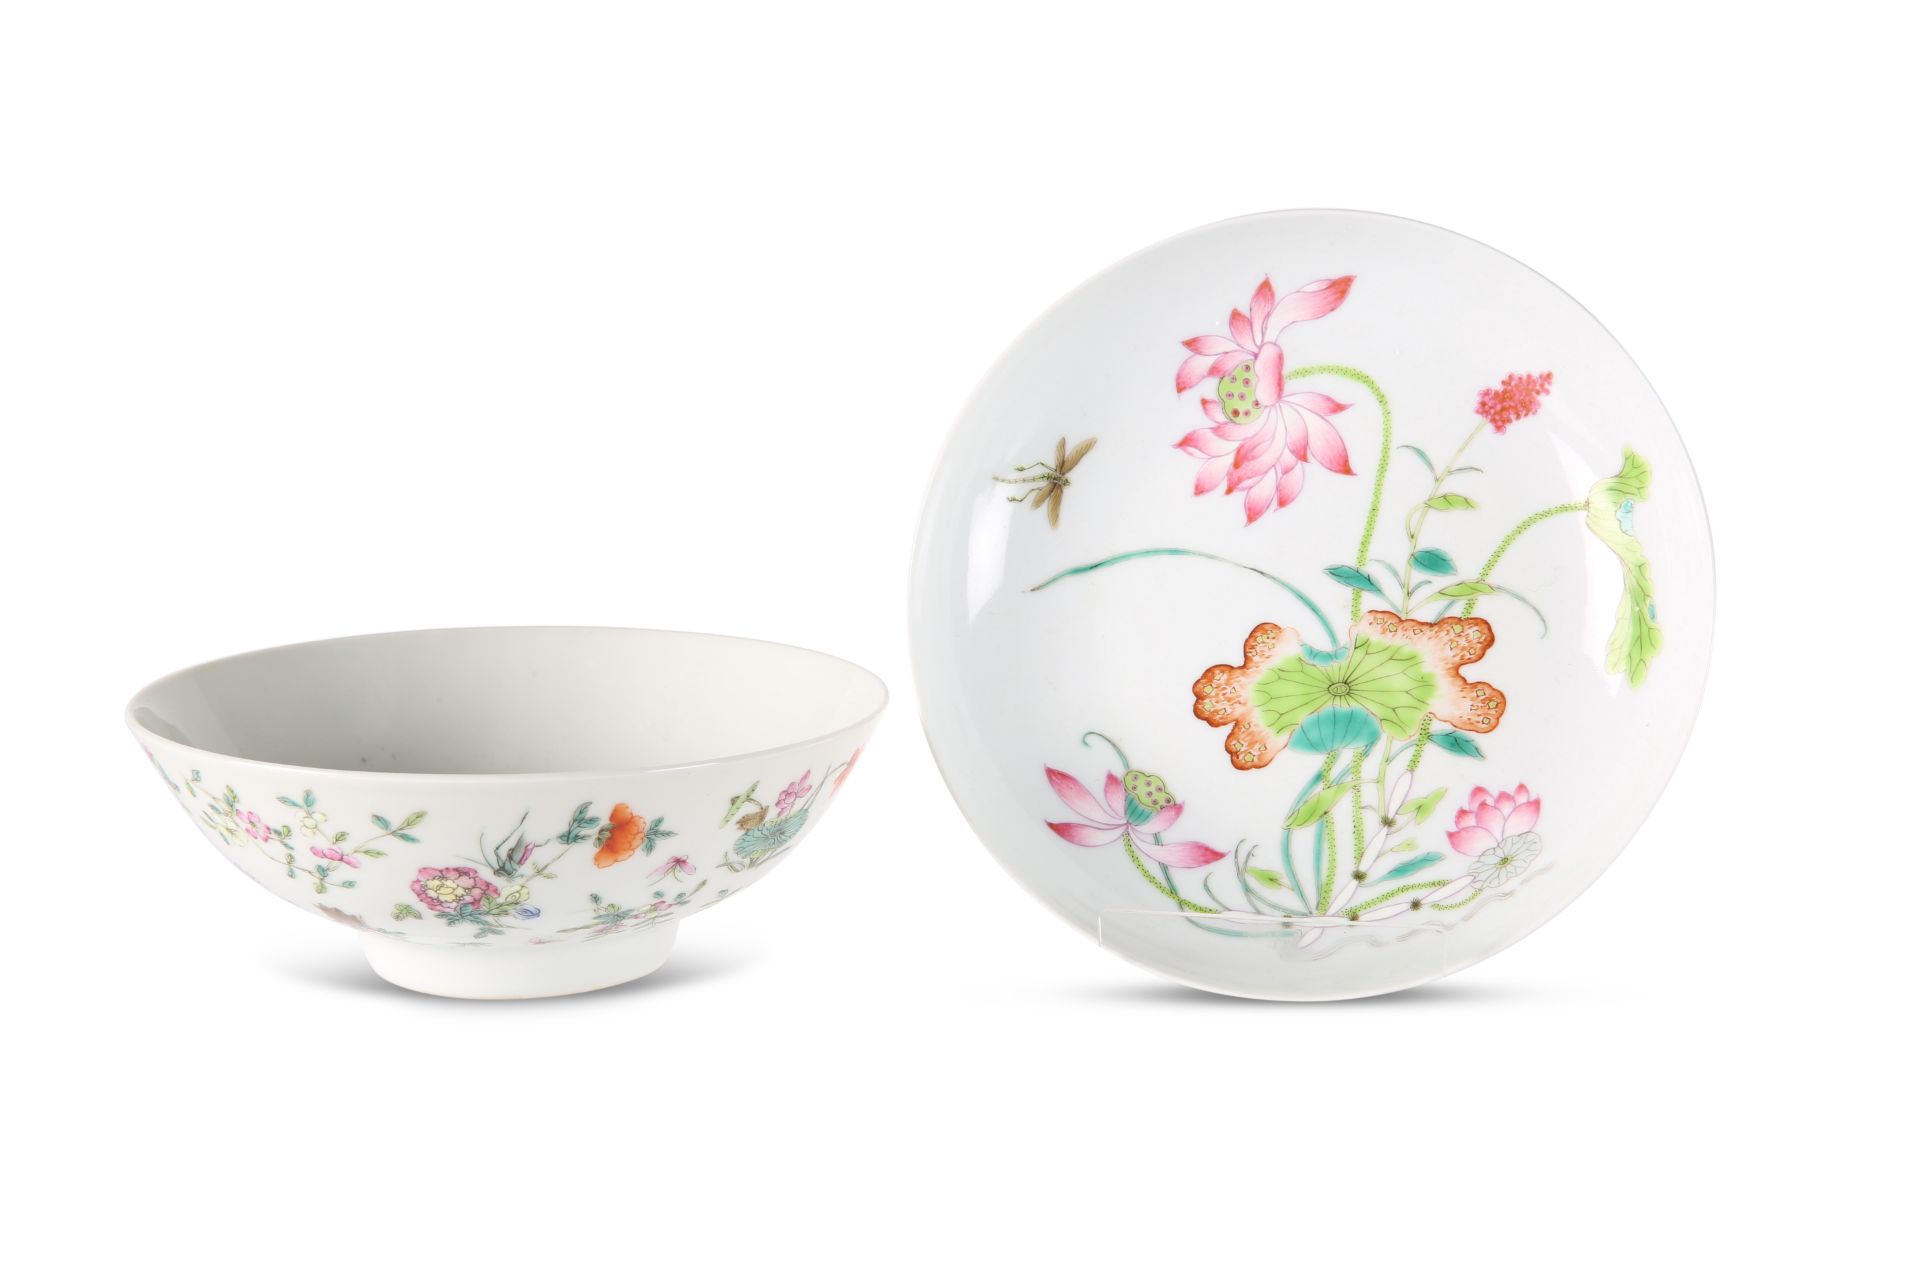 A CHINESE FAMILLE ROSE SAUCER DISH